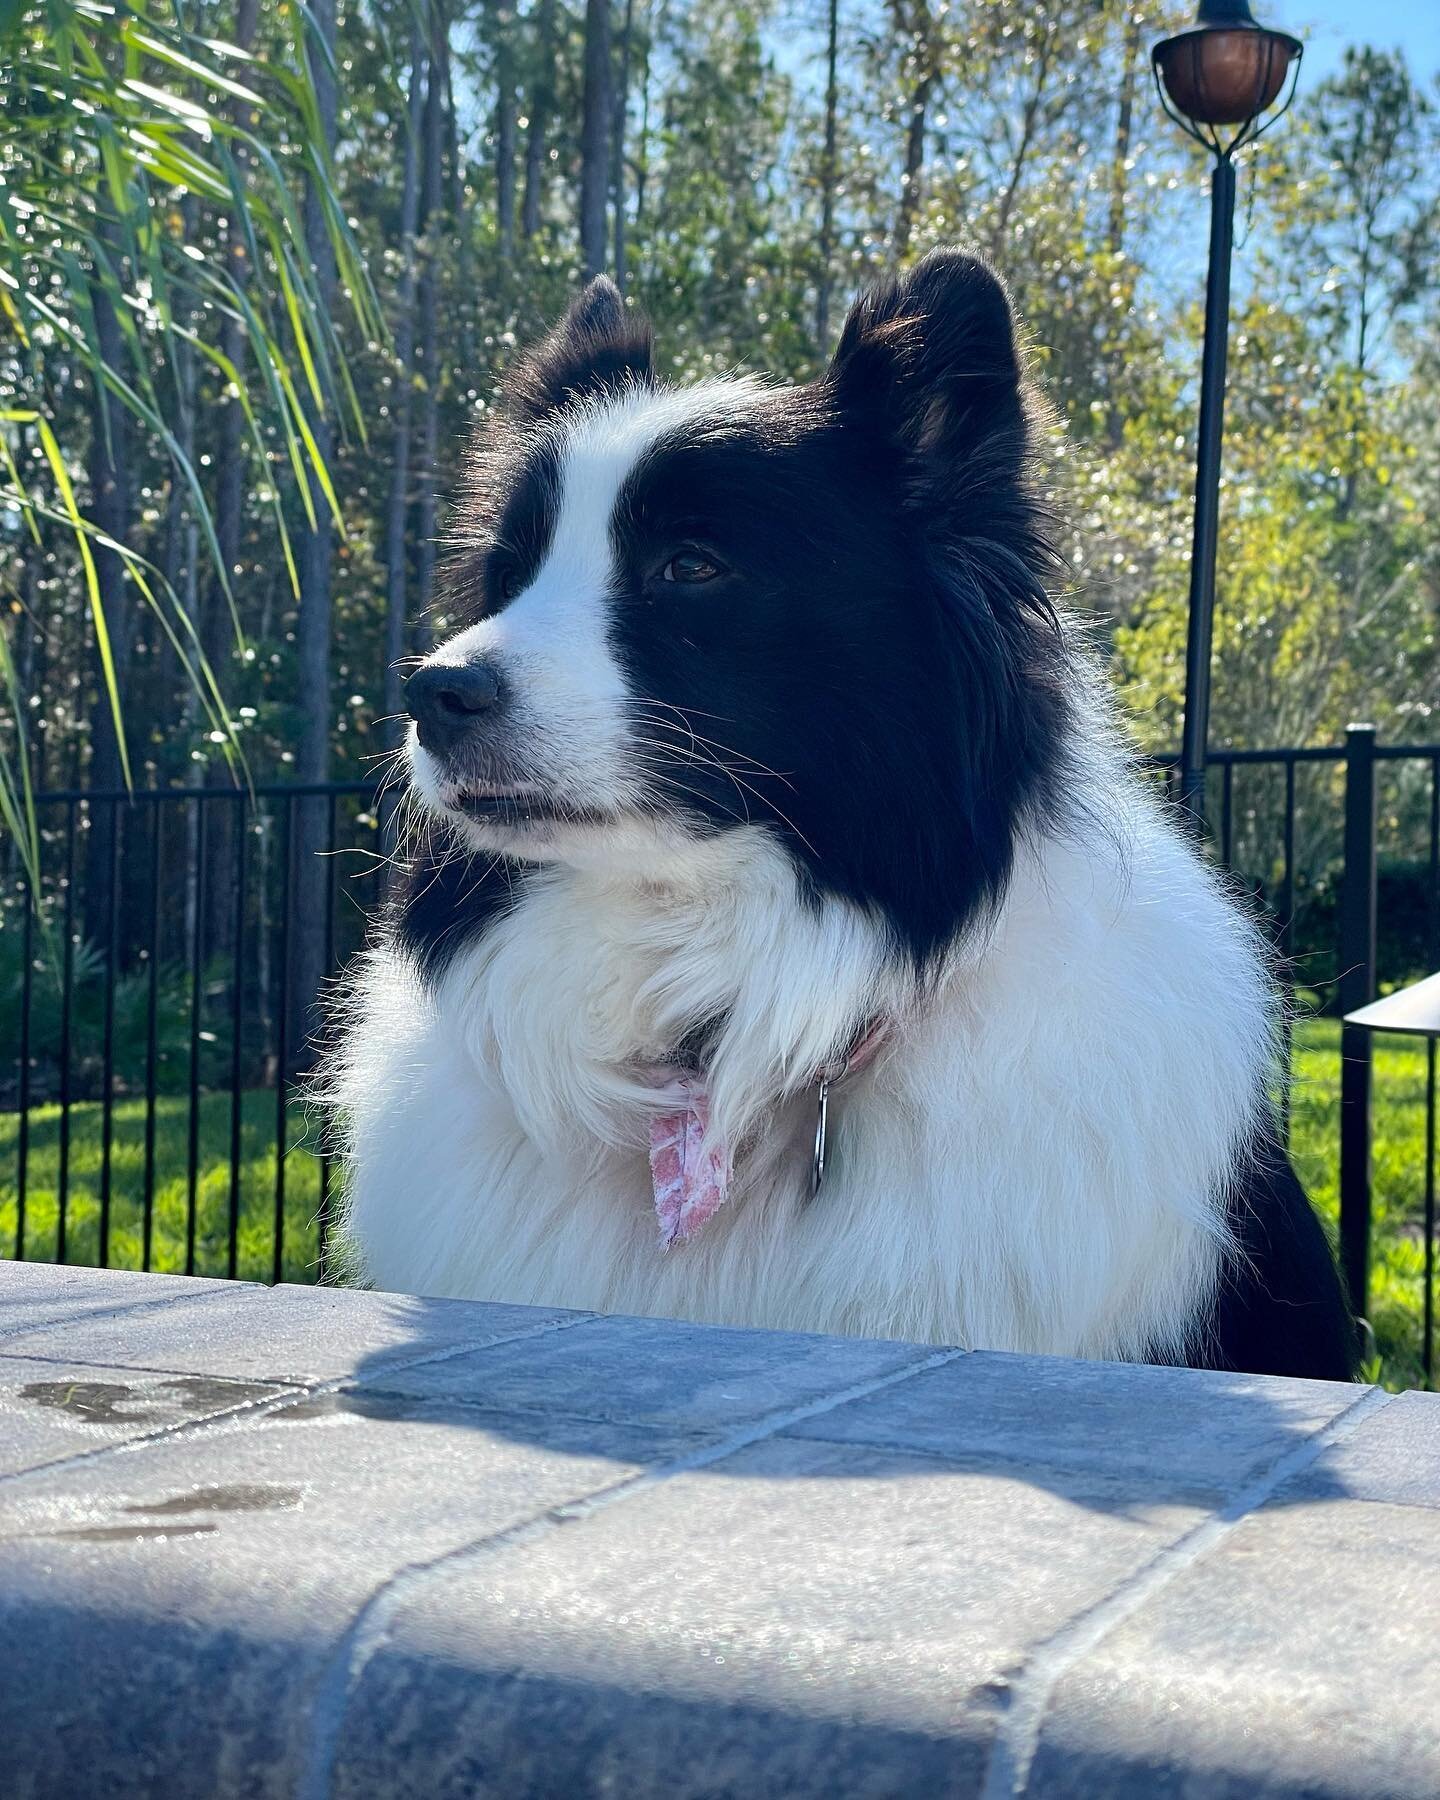 So regal (she was trying not to make eye contact with me). #bordercollie